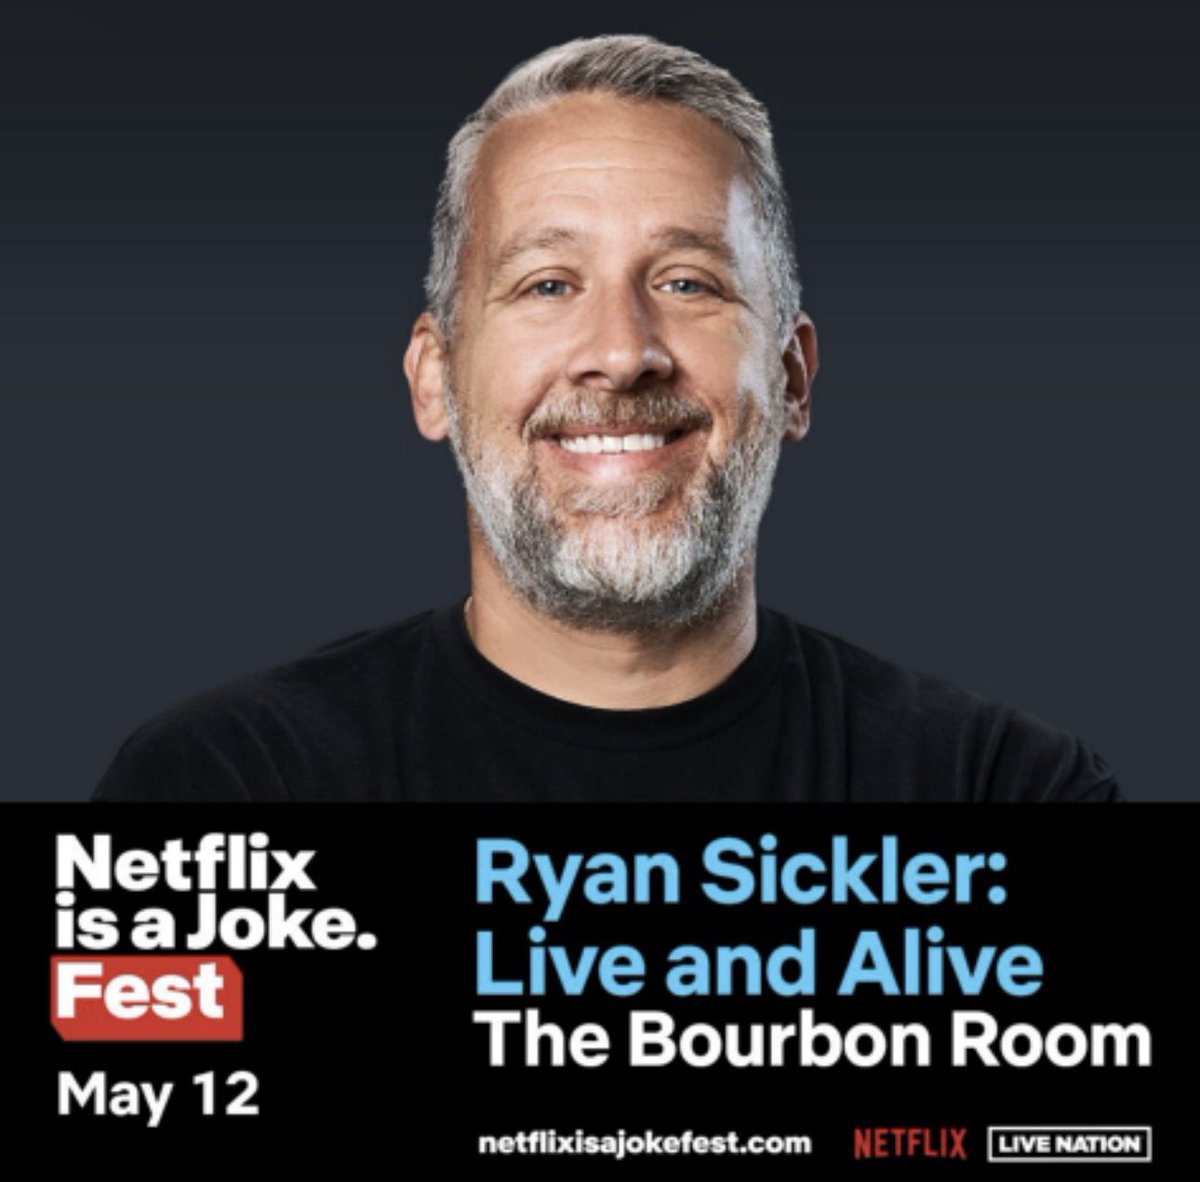 LOS ANGELES!! I’m fired up for my show at the Netflix is a Joke Fest! Catch me at the Bourbon Room Sunday, May 12th at 7p! Get your tickets now at ryansickler.com/tour!

#NetflixIsAJokeFest #RyanSickler #Comedy #May12th #netflix #standup